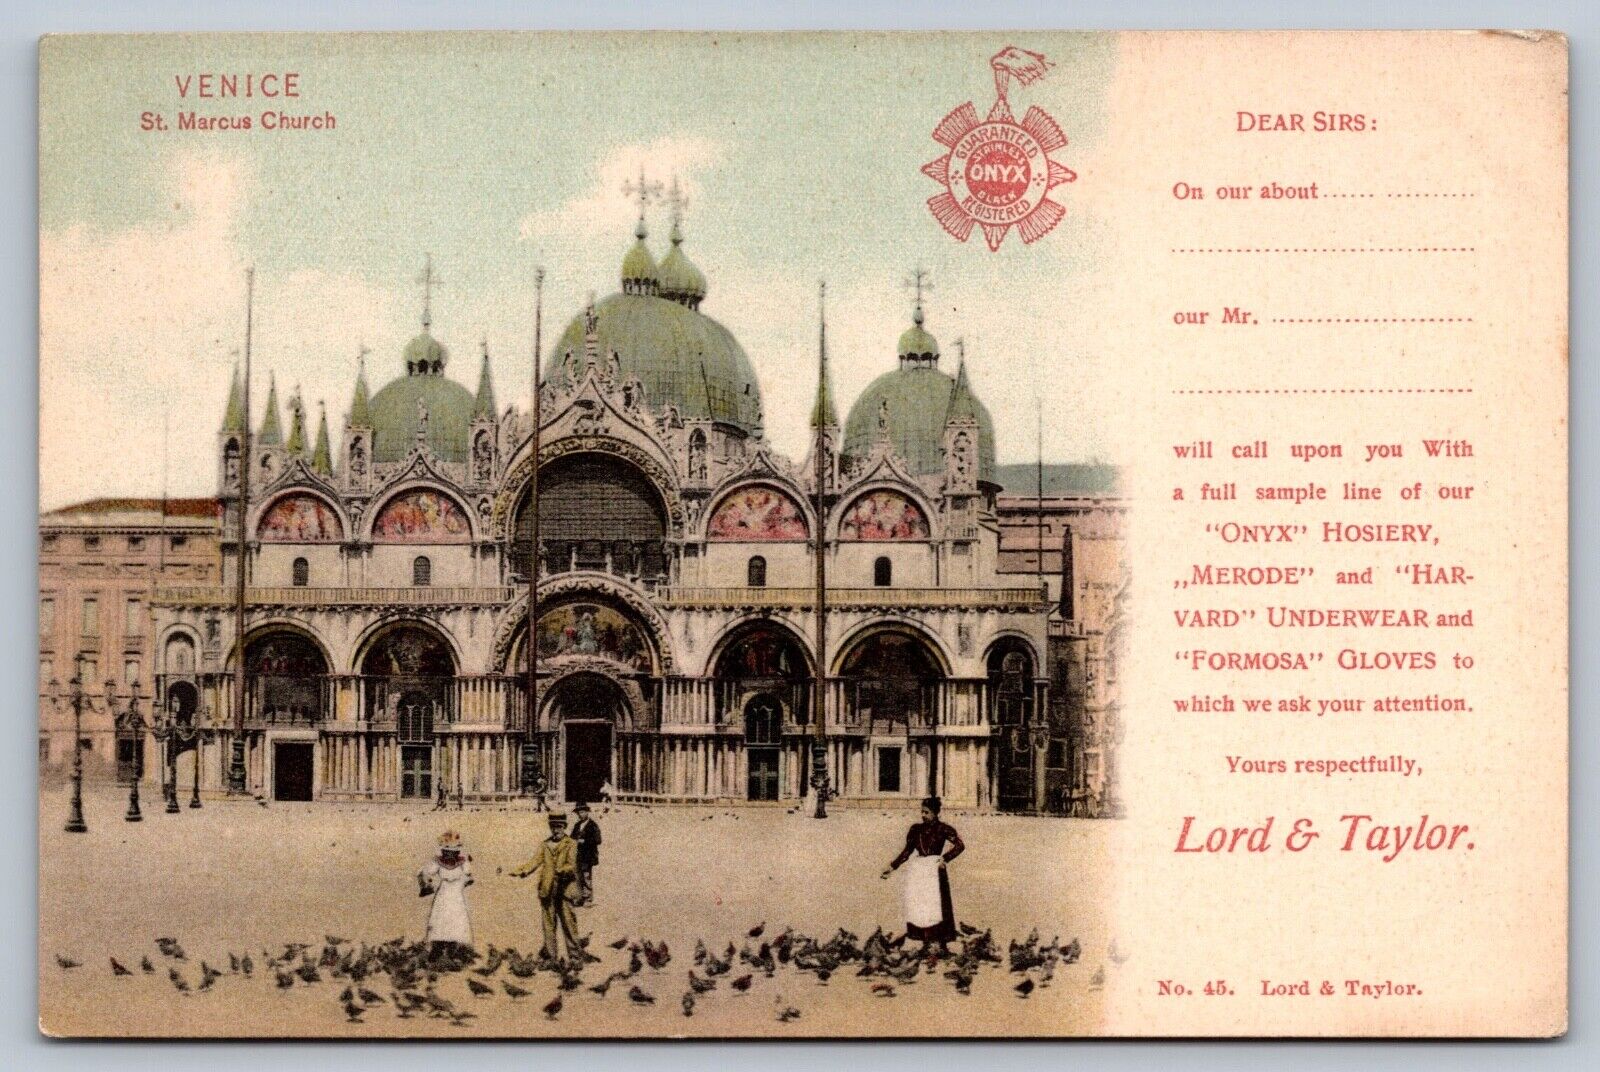 C1906 LORD & TAYLOR advertising postcard PRIVATE MAILING CARD VENICE SCENE